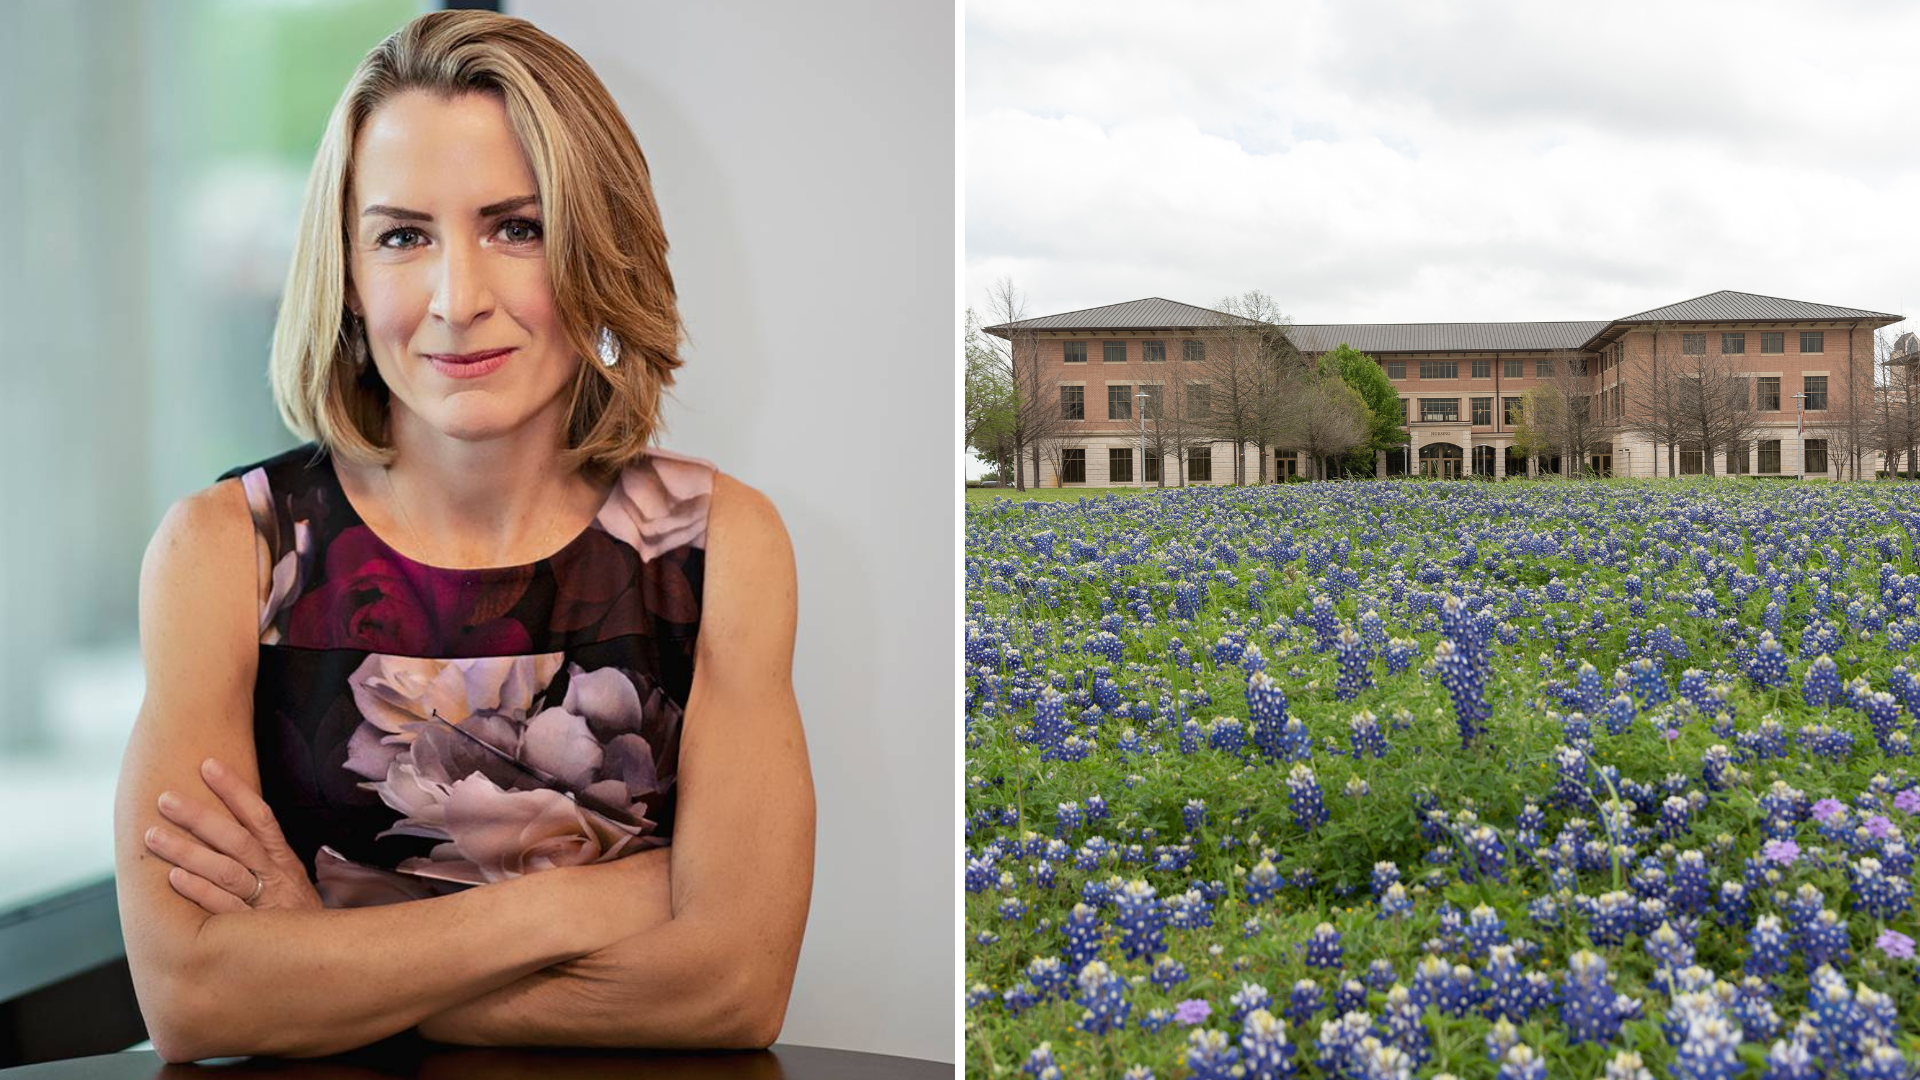 TXST Round Rock Campus' vice president Dr. Julie Lessiter and a shot of the Round Rock Campus.